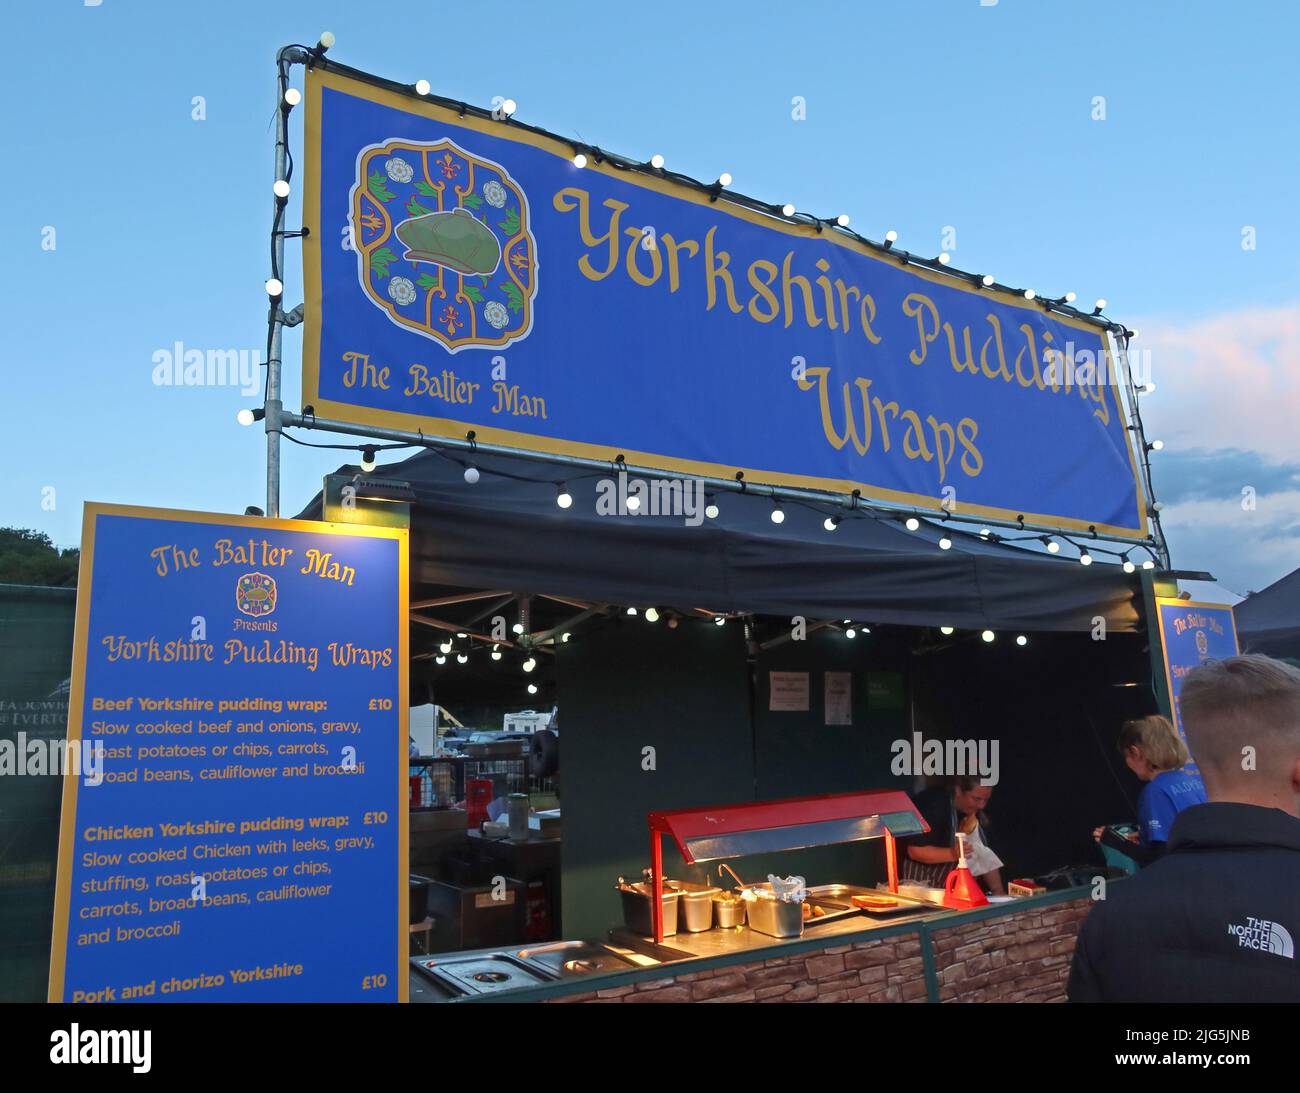 Il Batter Man, Yorkshire Pudding Wraps stall a Silverstone Woodlands, Silverstone , Northamptonshire, Inghilterra, Regno Unito Foto Stock